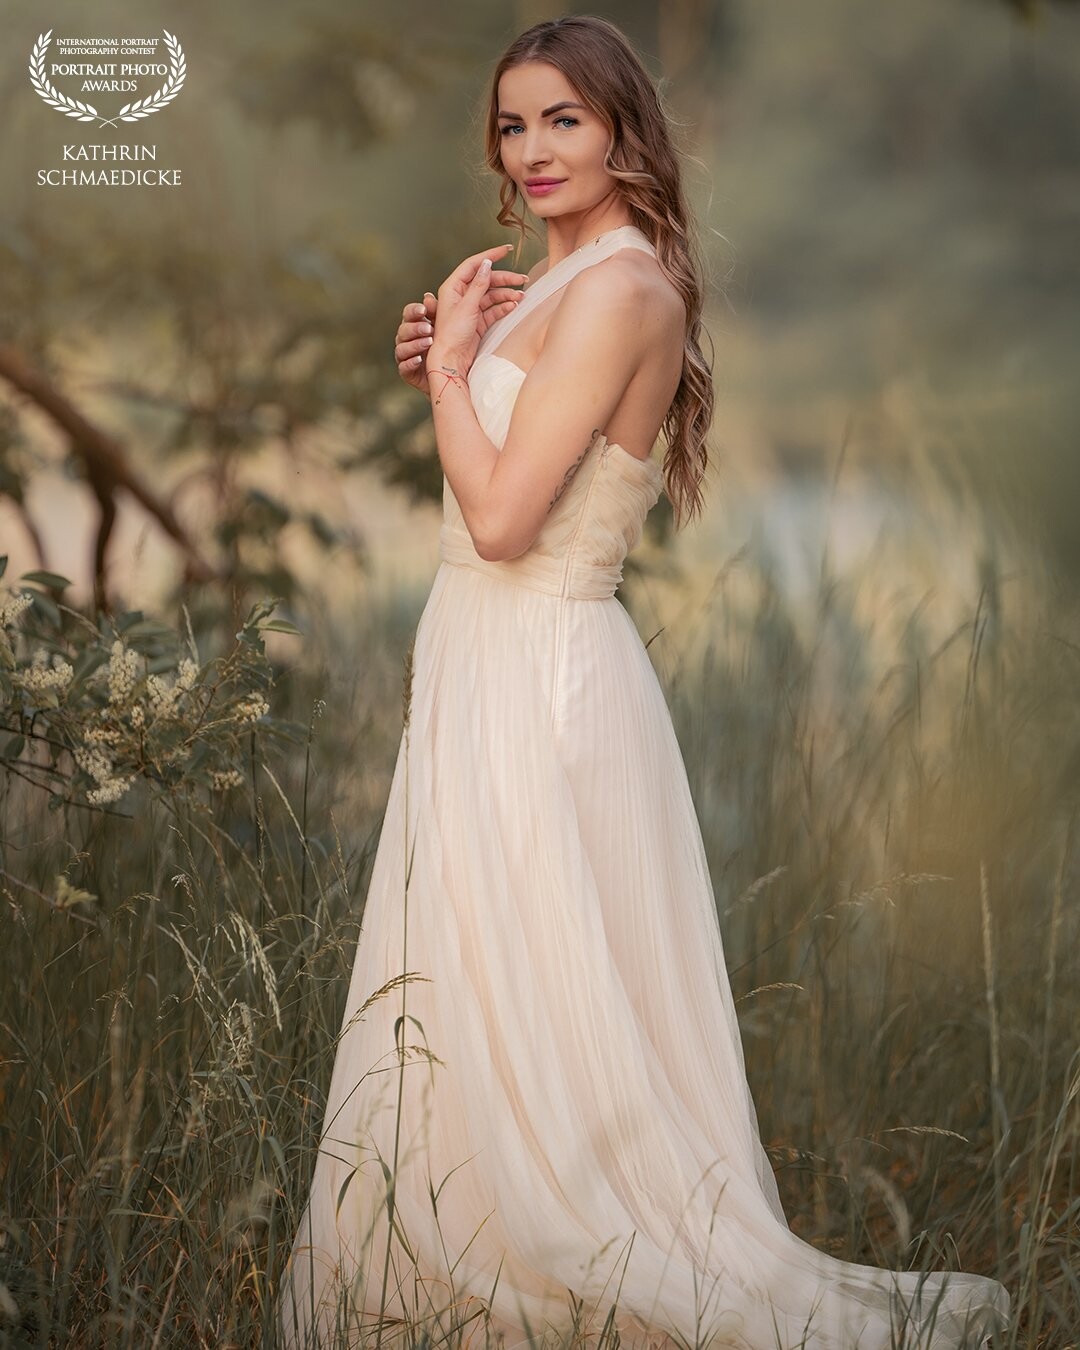 Fairytale portrait photography is one of my greatest strengths in photography, portrait photography means to realize an expressive picture coherence with special charm and expression in the pictures